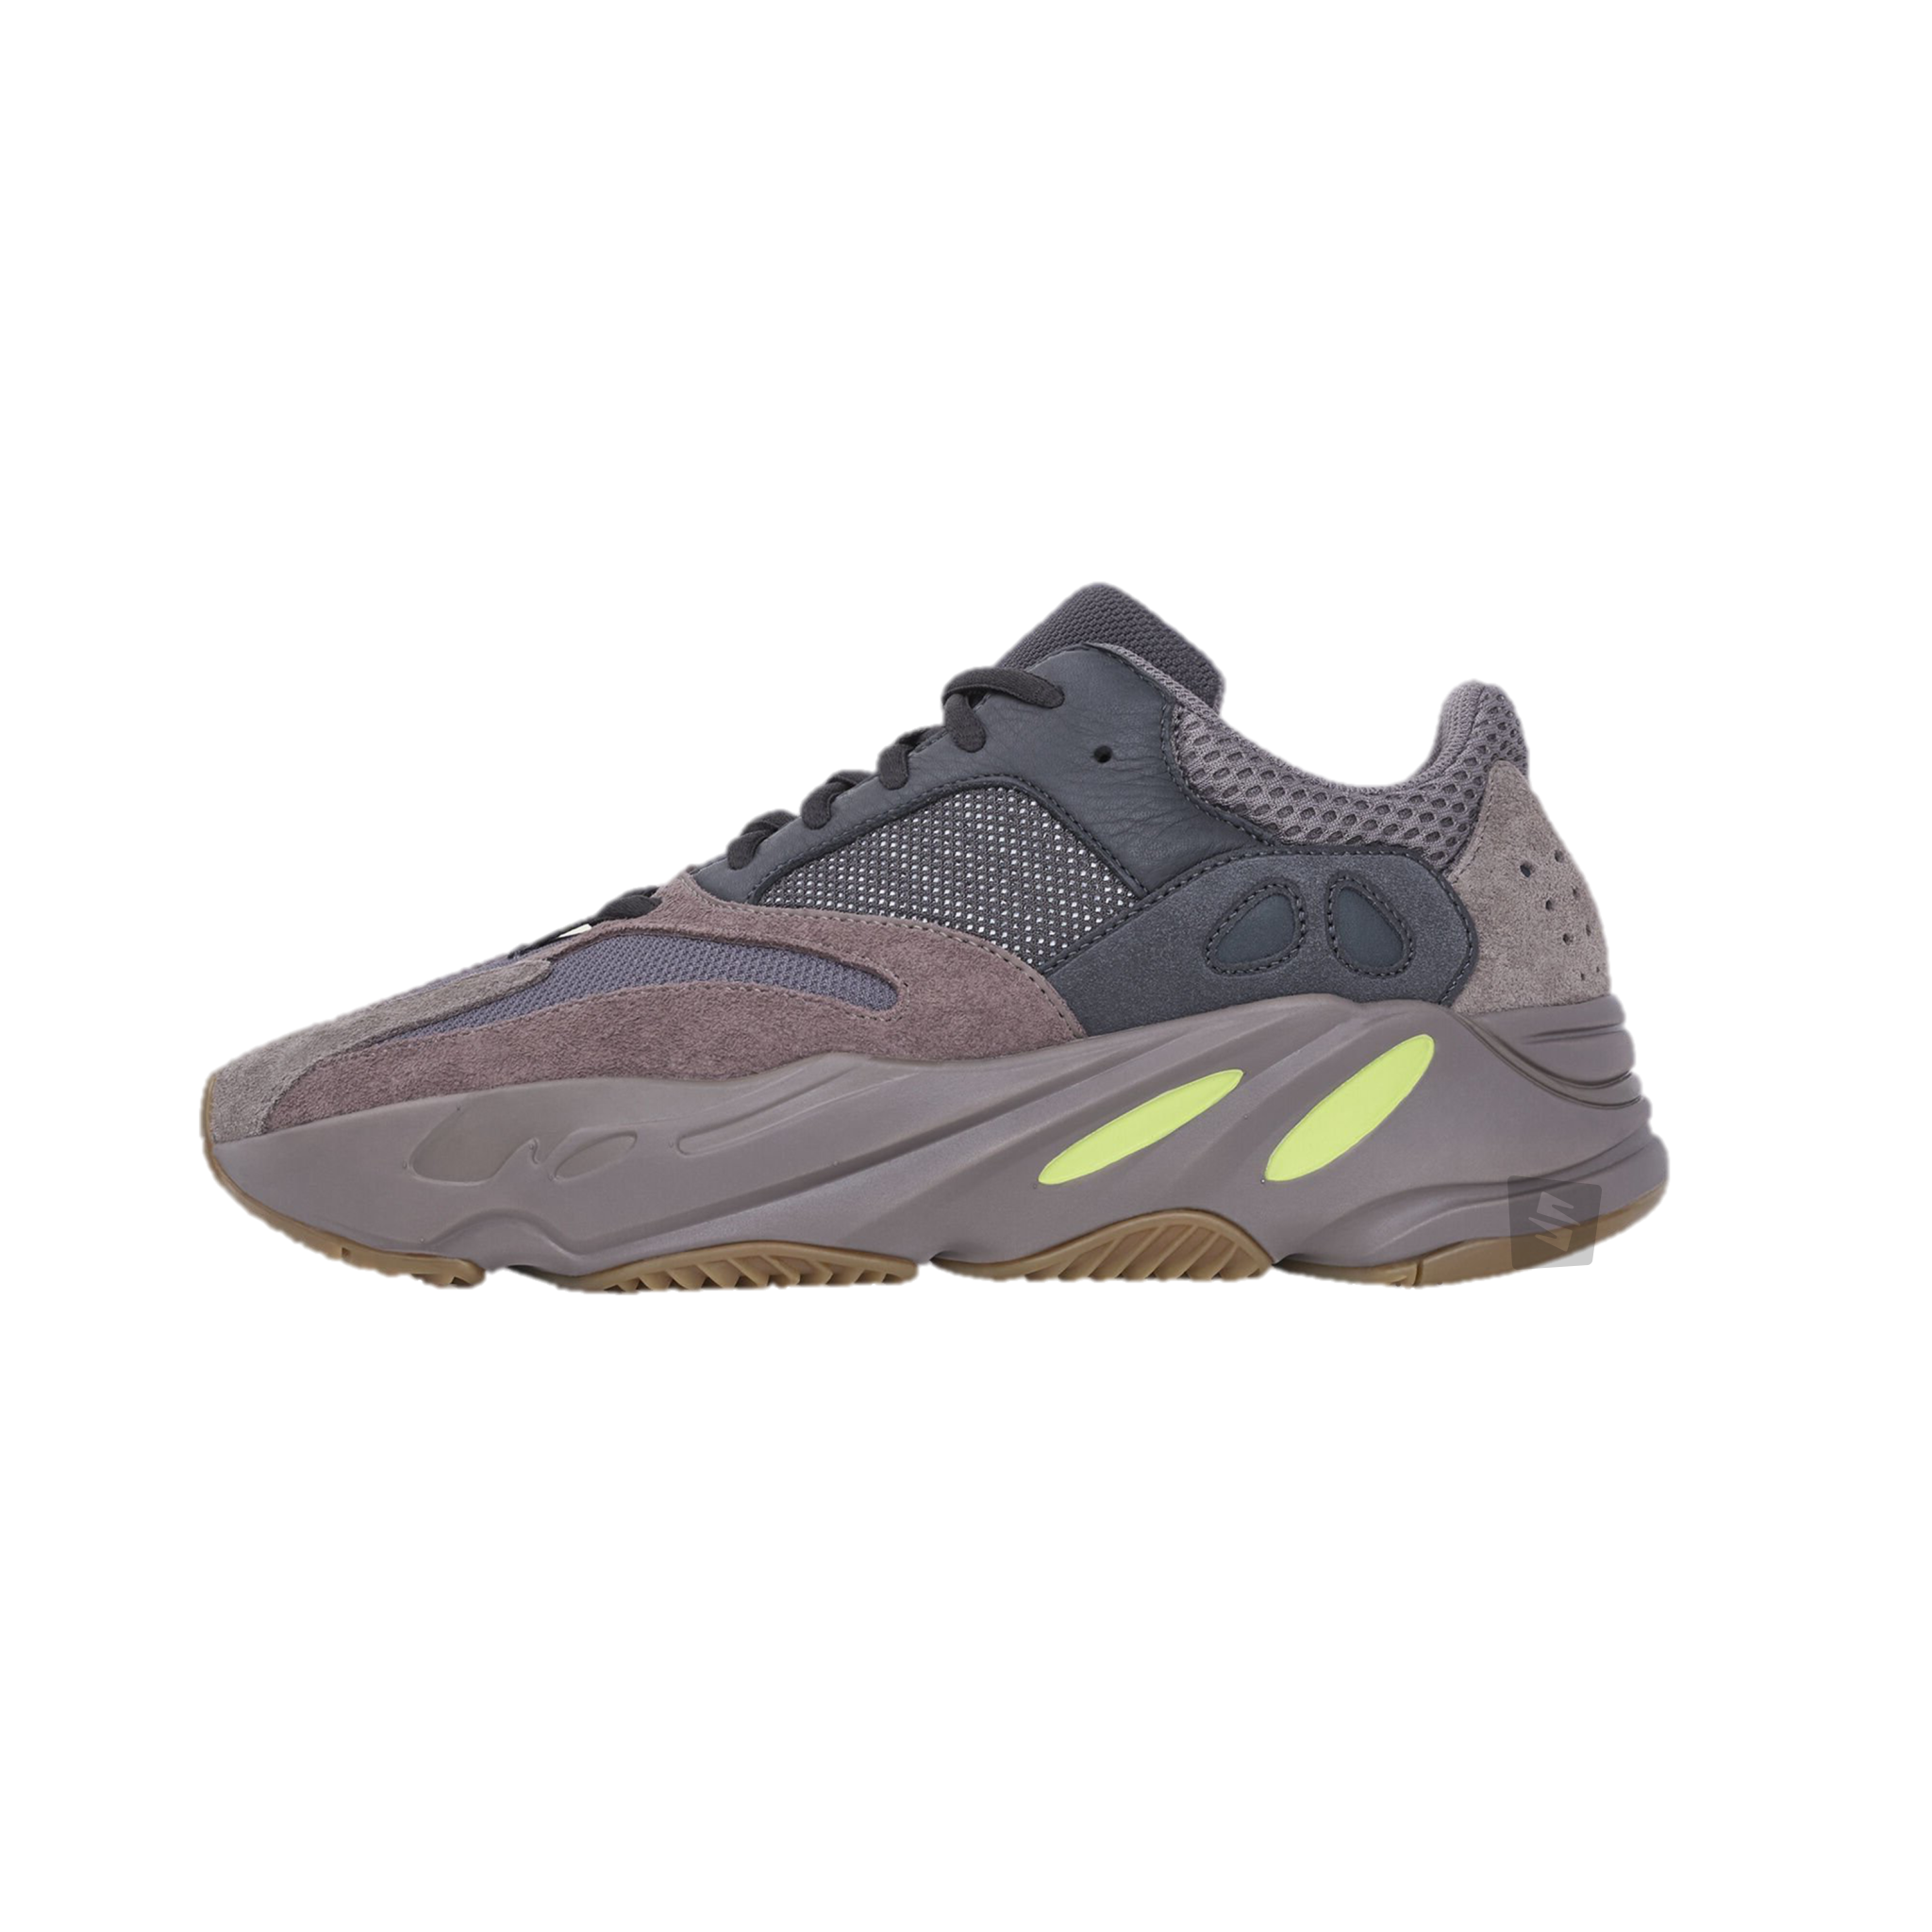 yeezy boost 700 mauve release